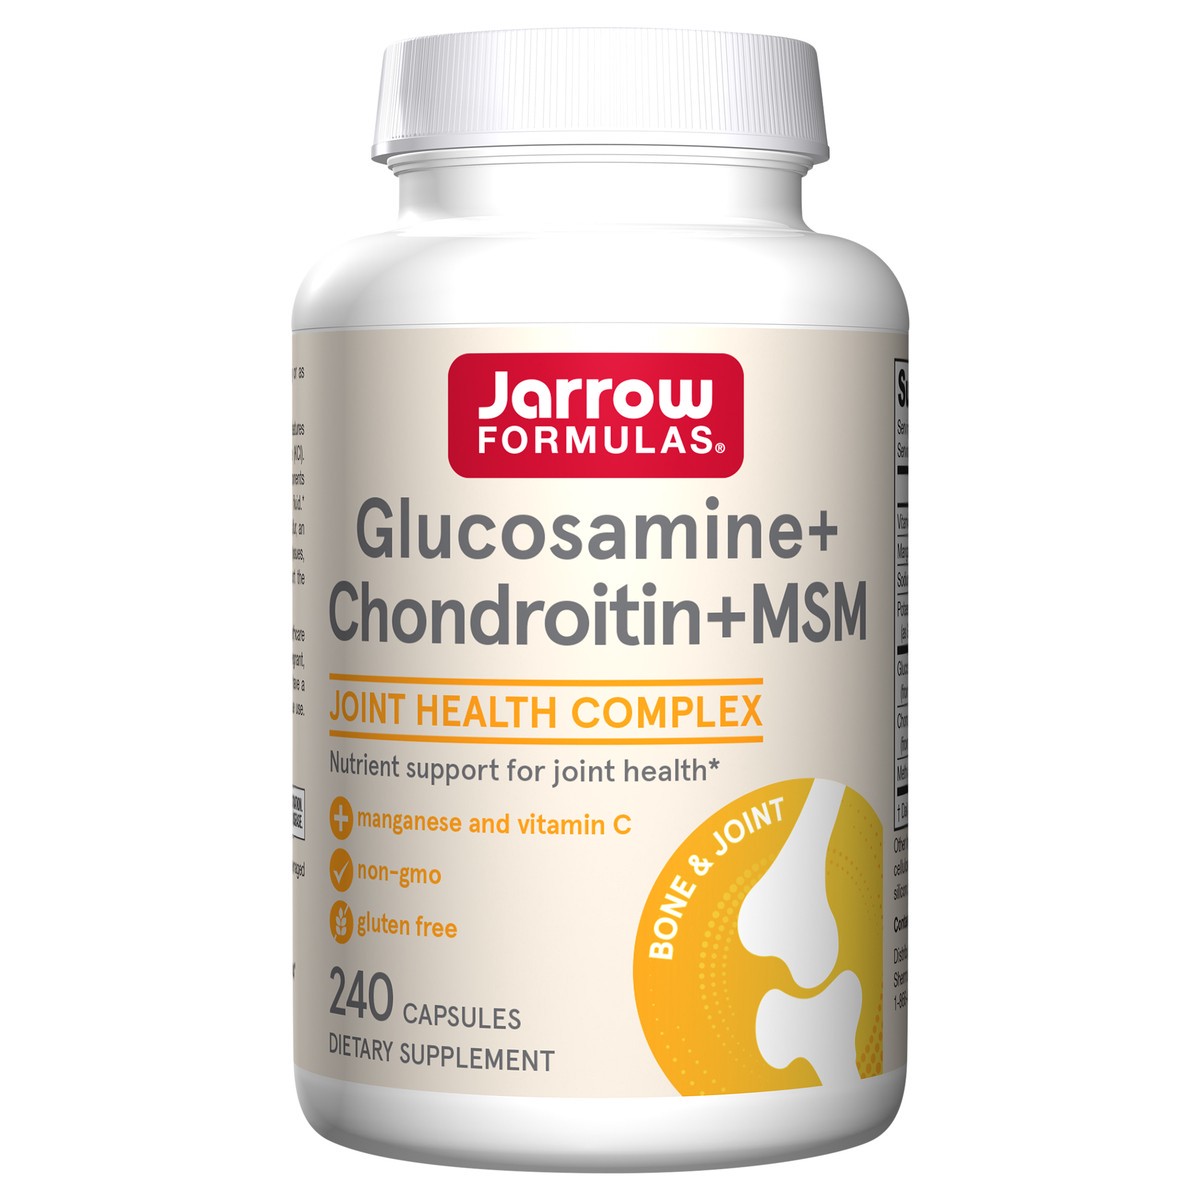 slide 1 of 1, Jarrow Formulas Glucosamine + Chondroitin + MSM - 240 Capsules - 60 Servings - Joint Support Supplement - Glucosamine Chondroitin MSM Capsules - With Vitamin C & Manganese - Non-GMO - Gluten Free, 240 ct